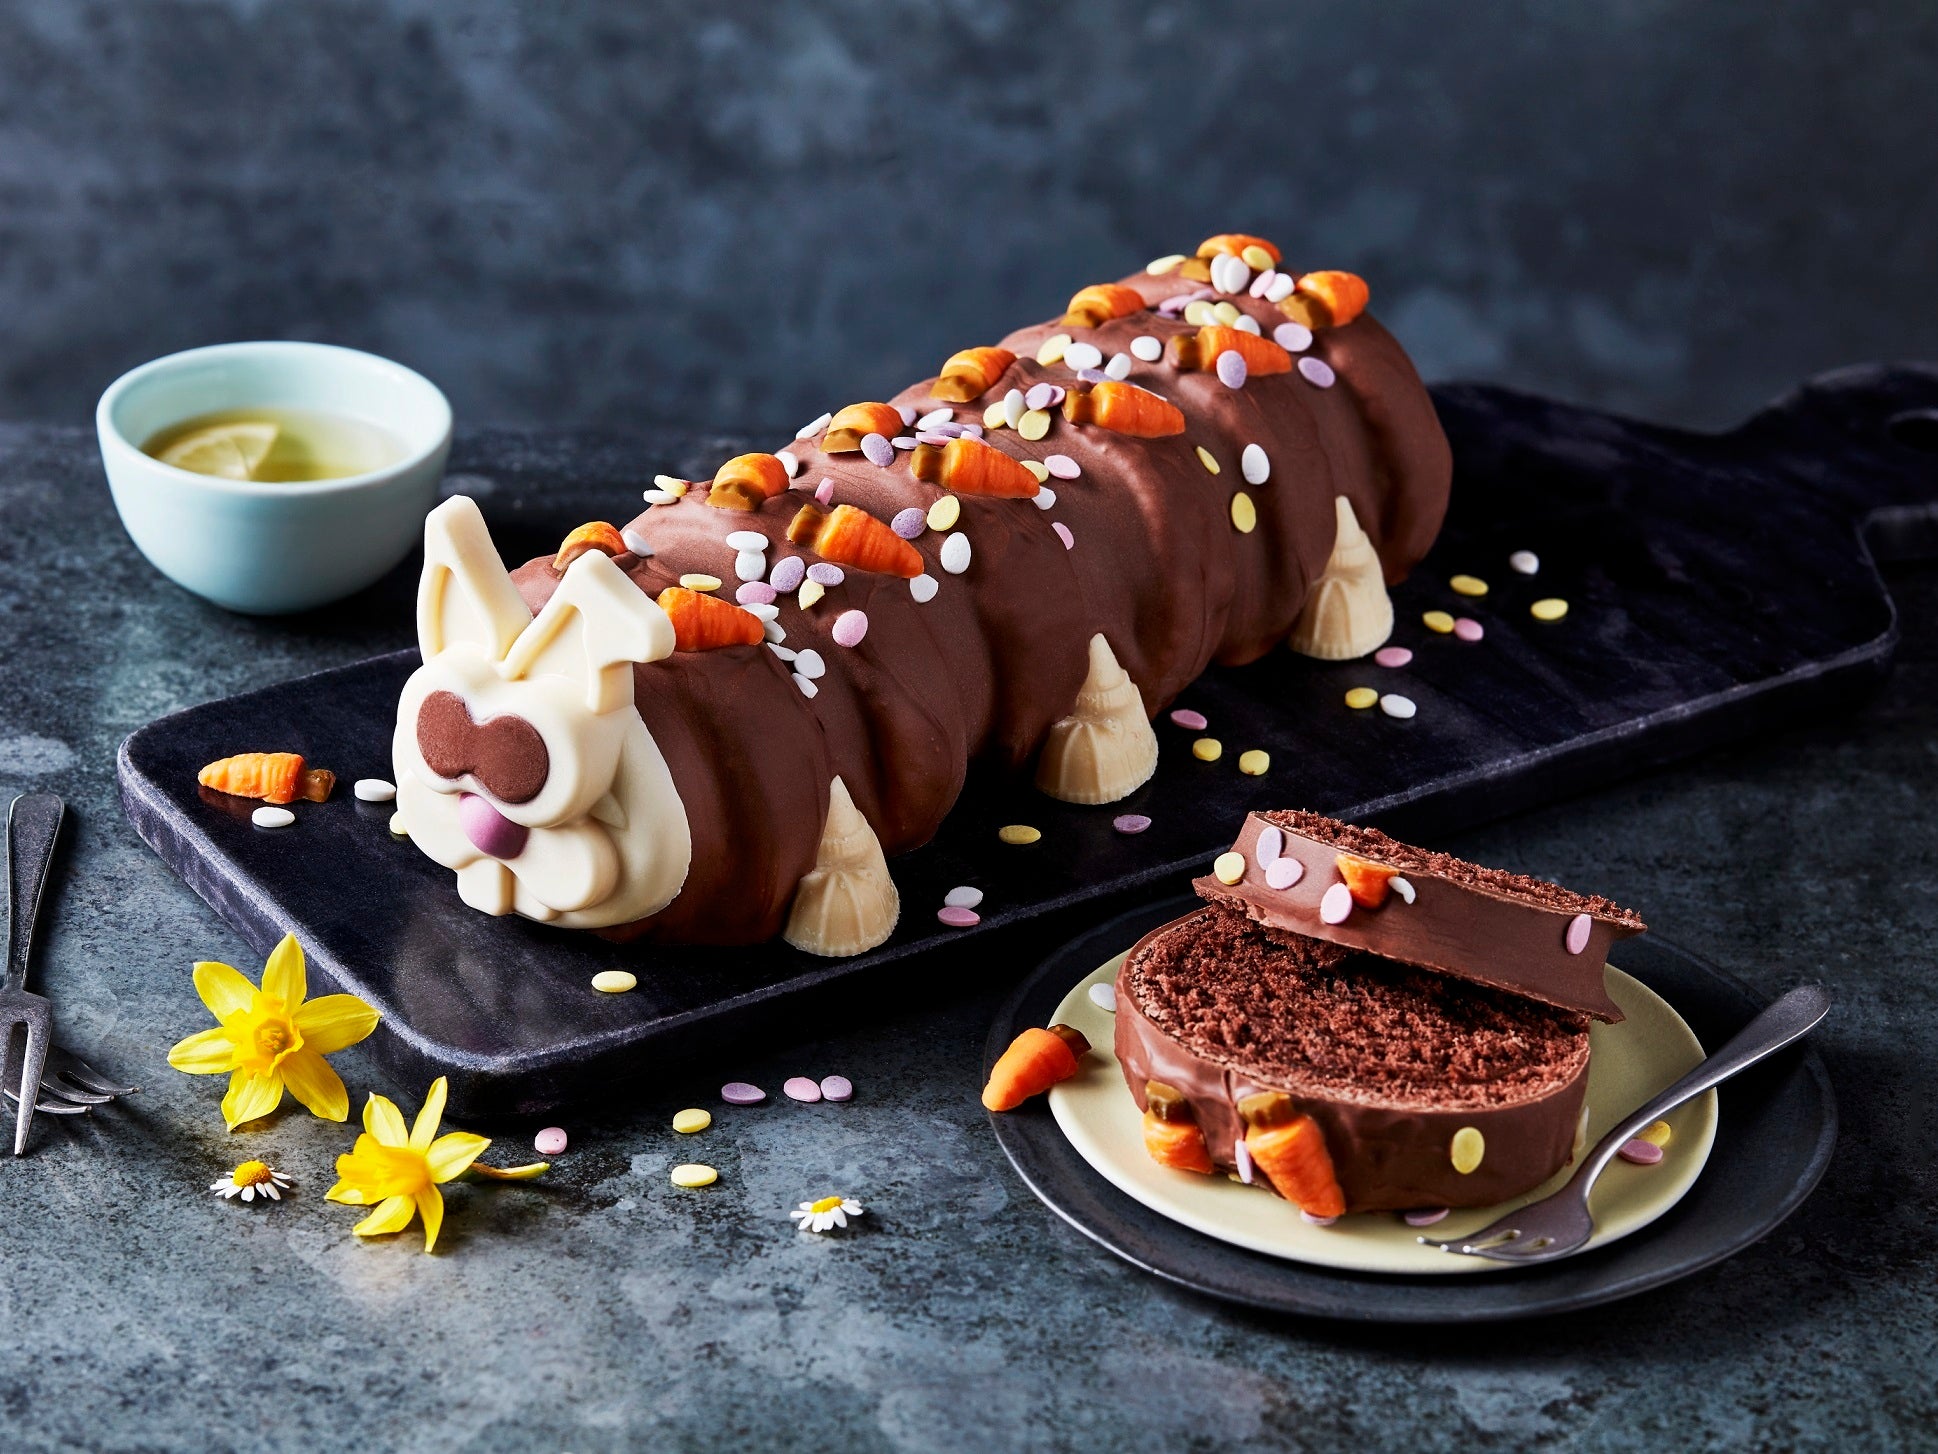 M&S brings back superhero Colin the Caterpillar for Father's Day - The Mail